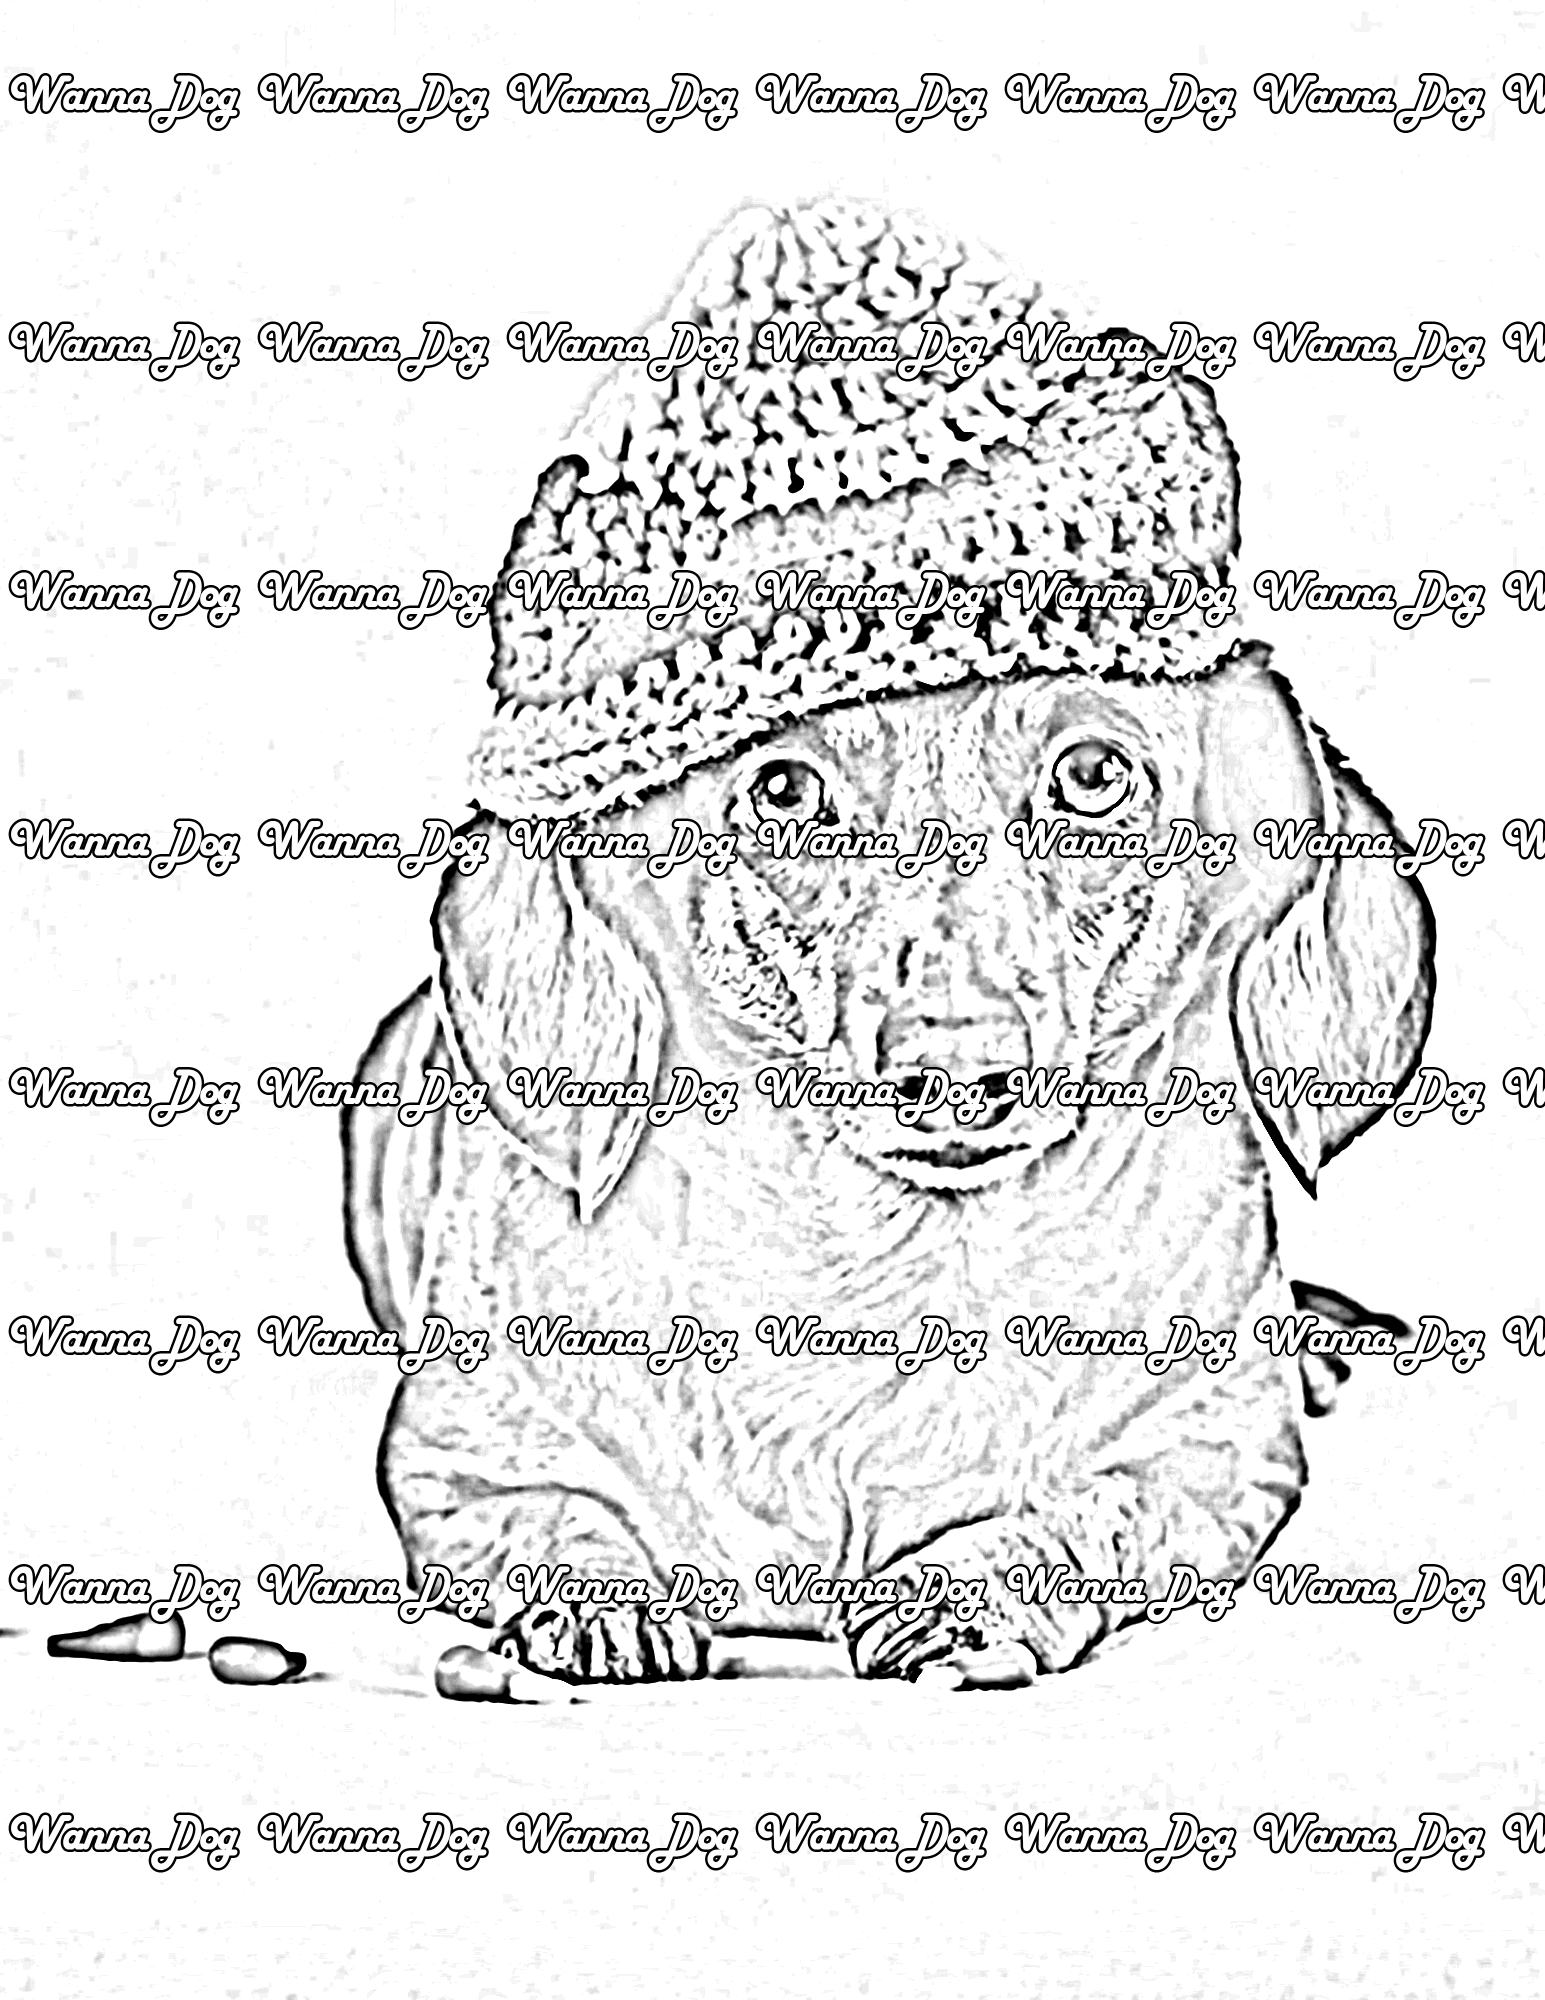 Halloween Puppy Coloring Page of a puppy wearing a hat and laying next to candy corn